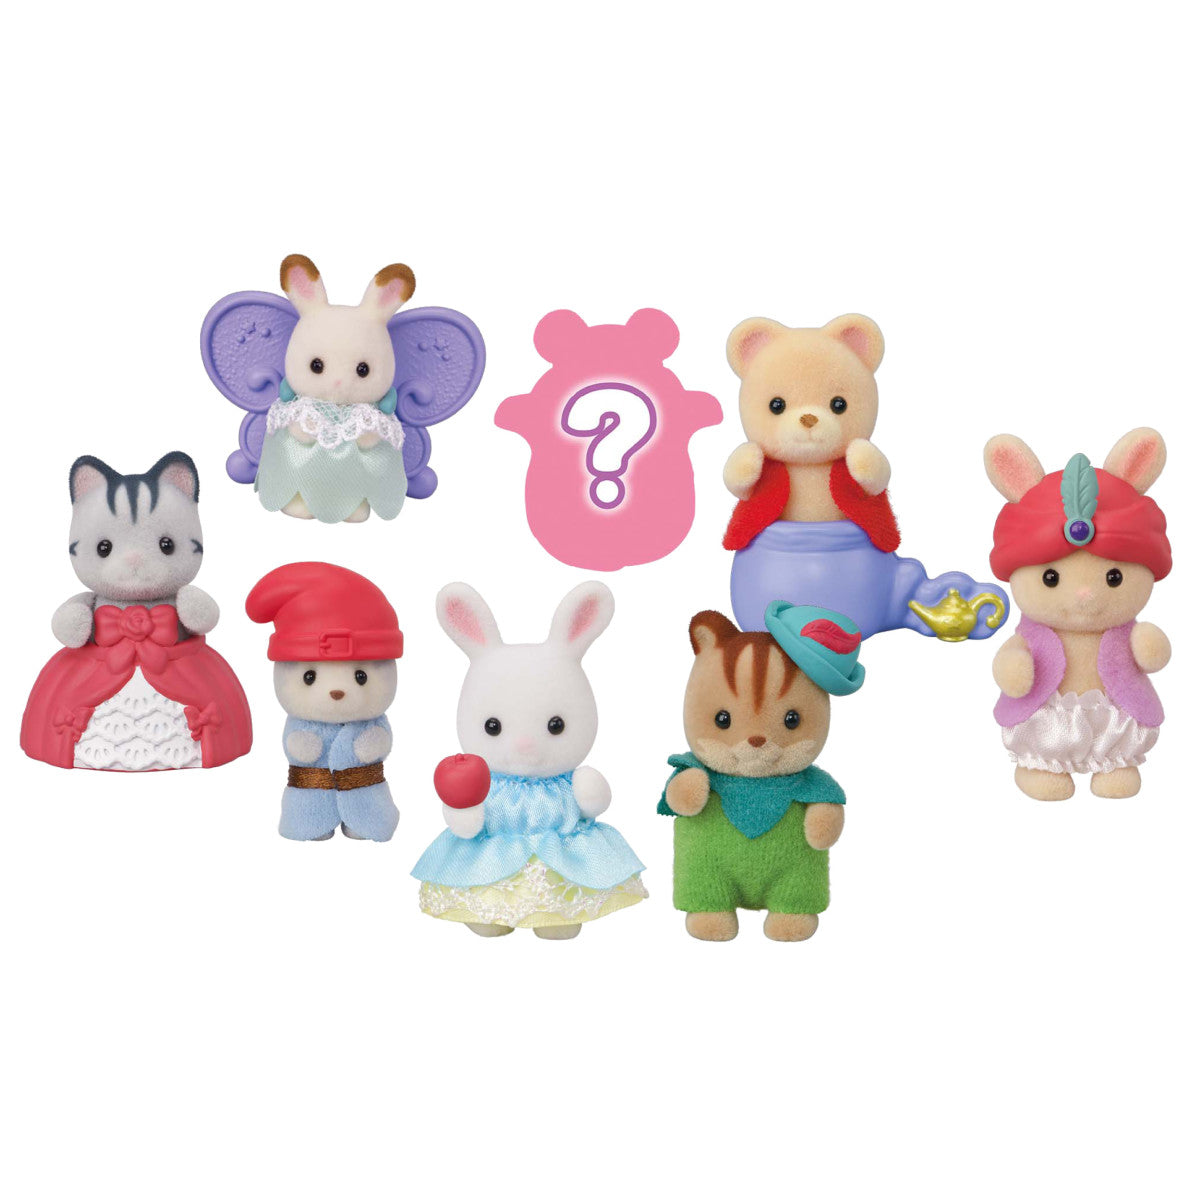 Baby Fairy Tale Series Blind Bag by Calico Critters #CC2072